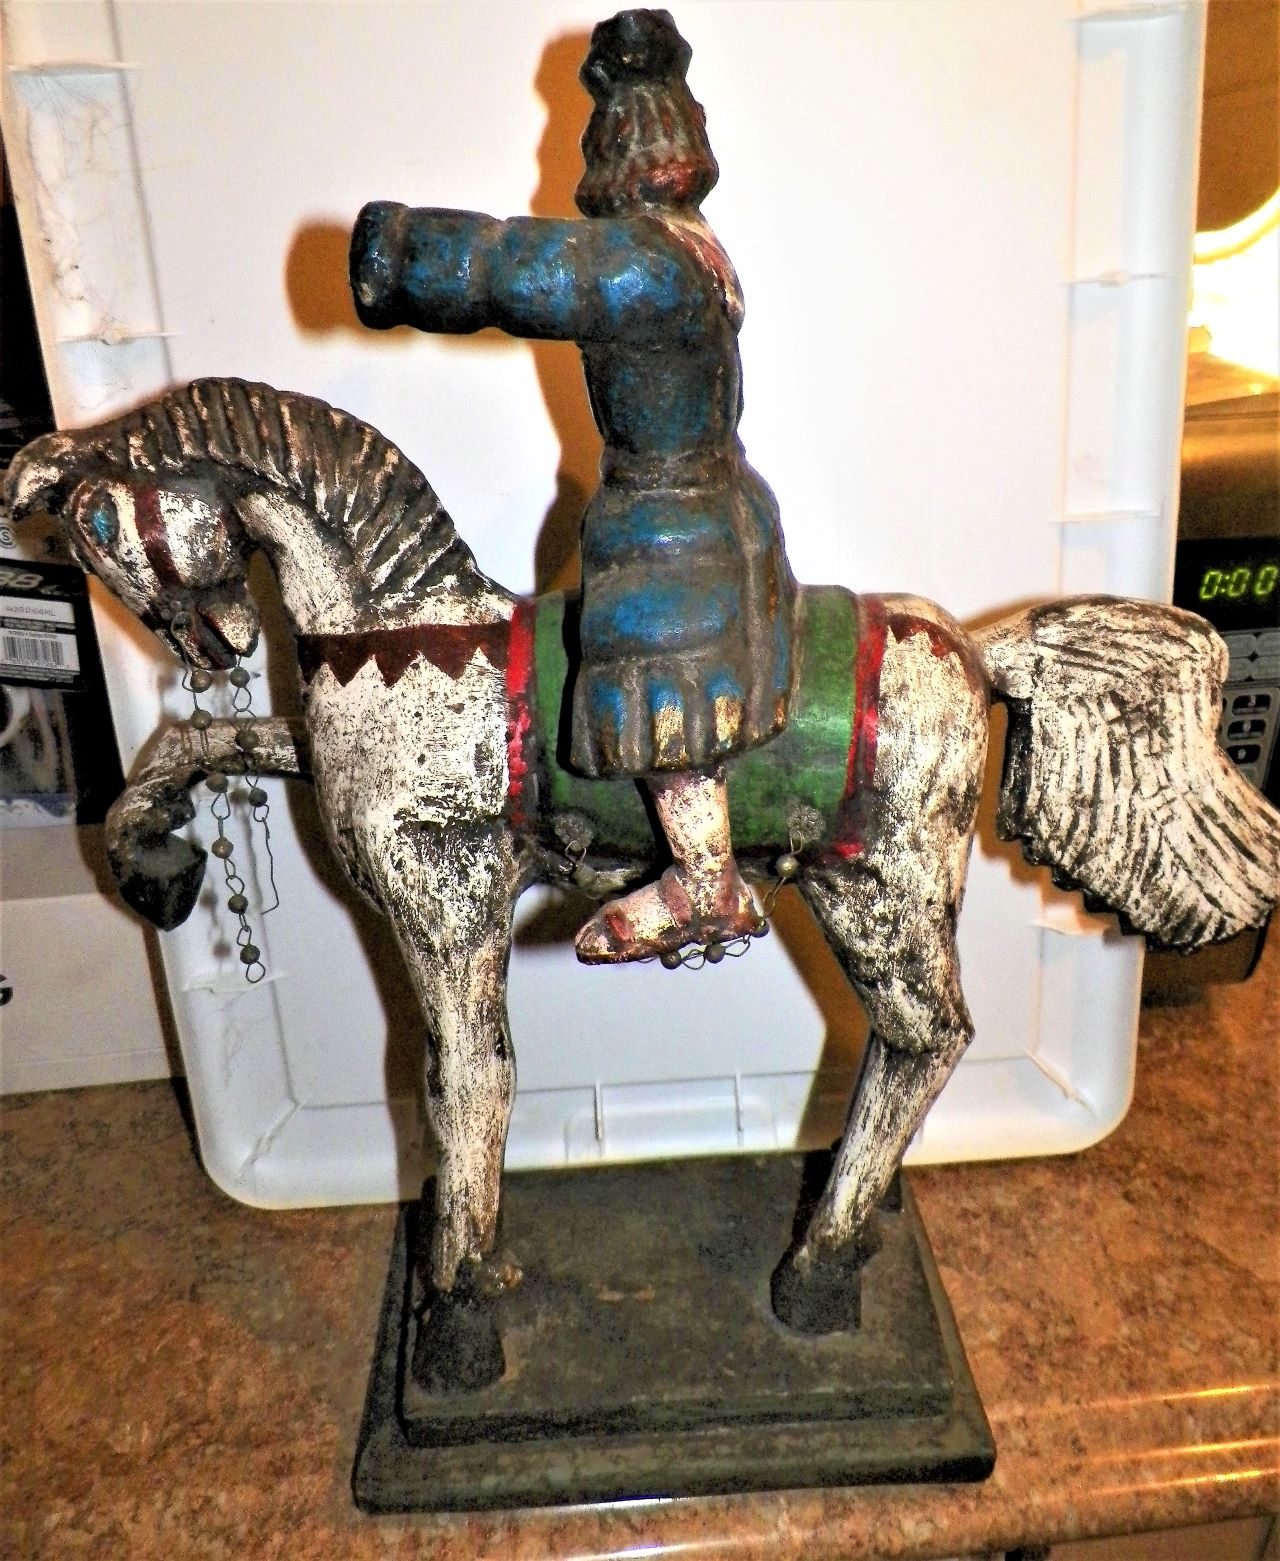 HELP w/ANY INFO/AGE OF LARGE OLD CARVED WOOD HORSE & RIDER | Antiques Board